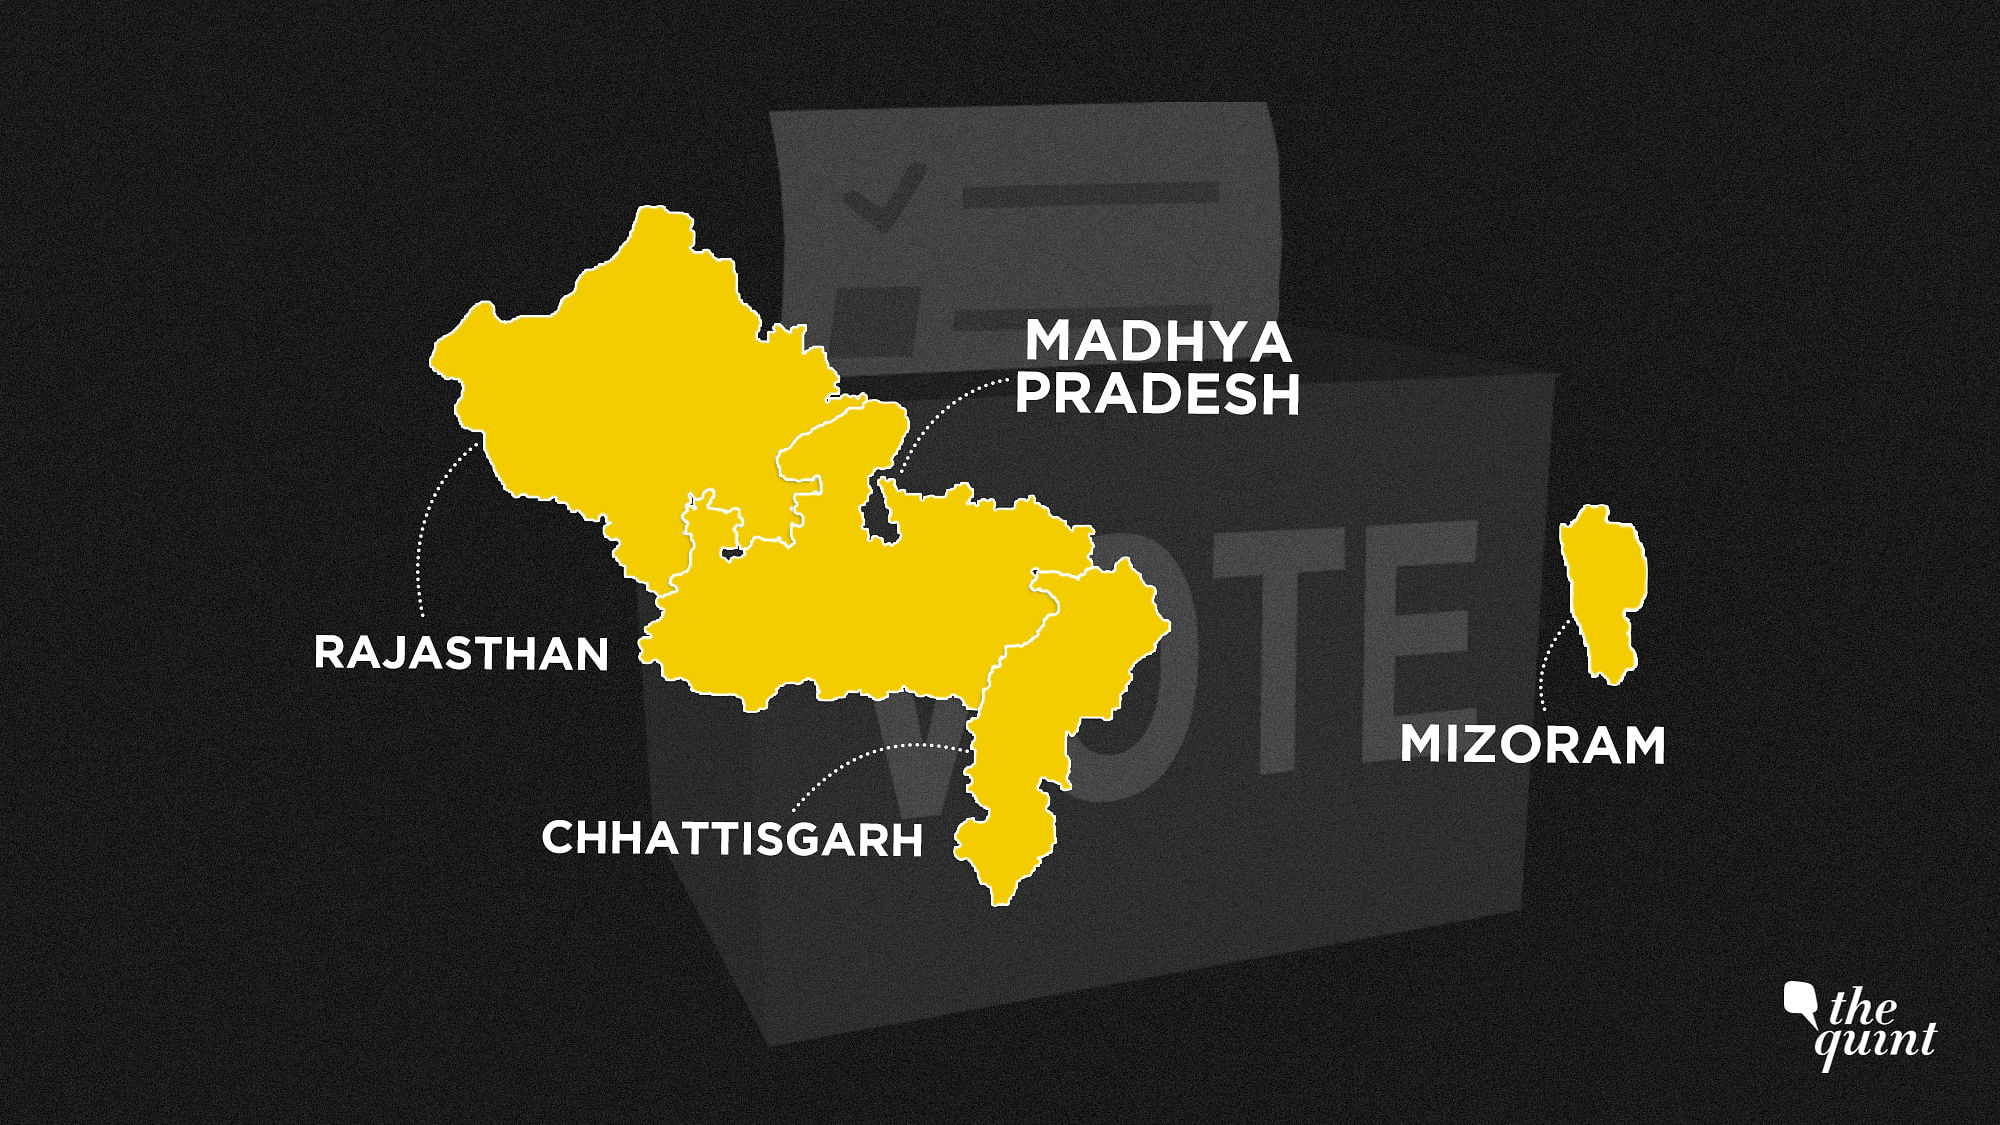 The Election Commission is likely to announce the dates of Assembly elections in Madhya Pradesh, Rajasthan, Chhattisgarh, and Mizoram on Saturday, 6 October.